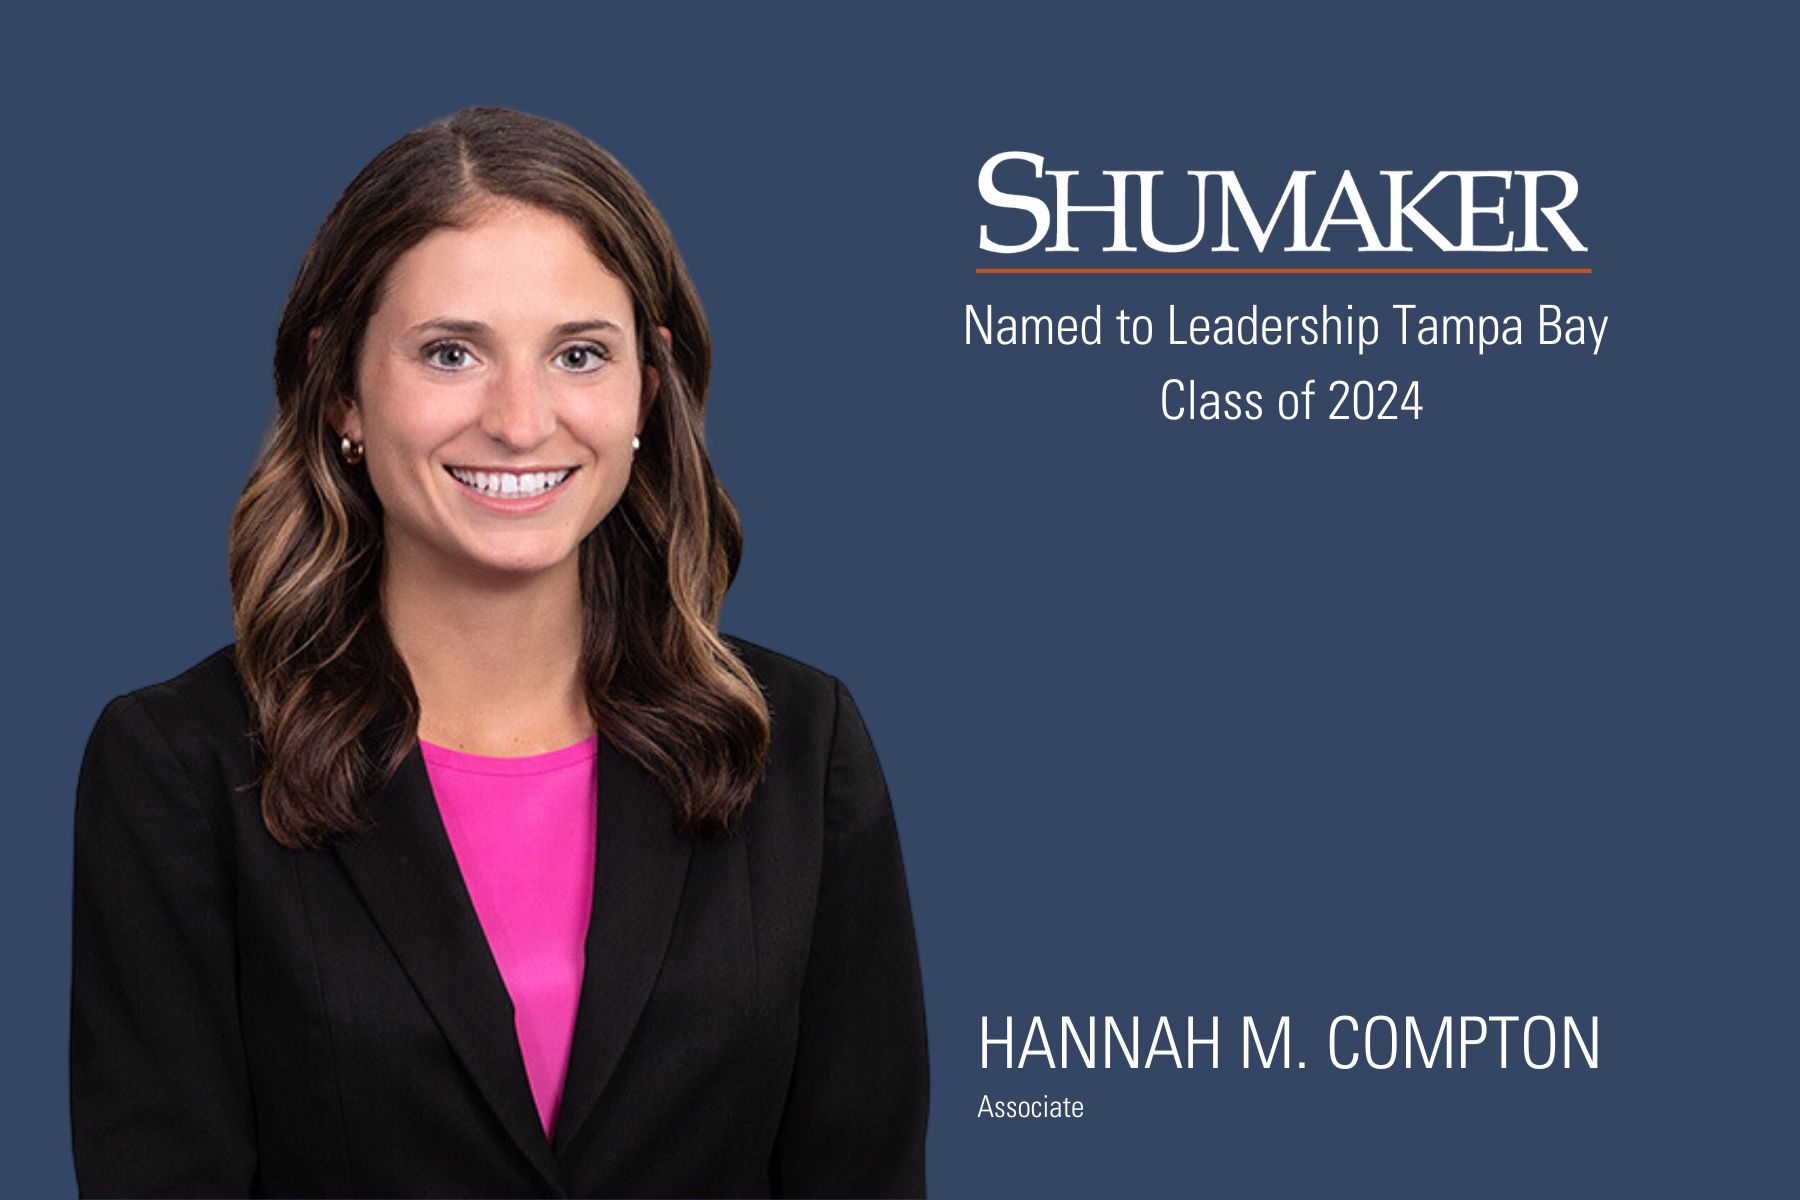 Hannah M. Compton Named to Leadership Tampa Bay Class of 2024